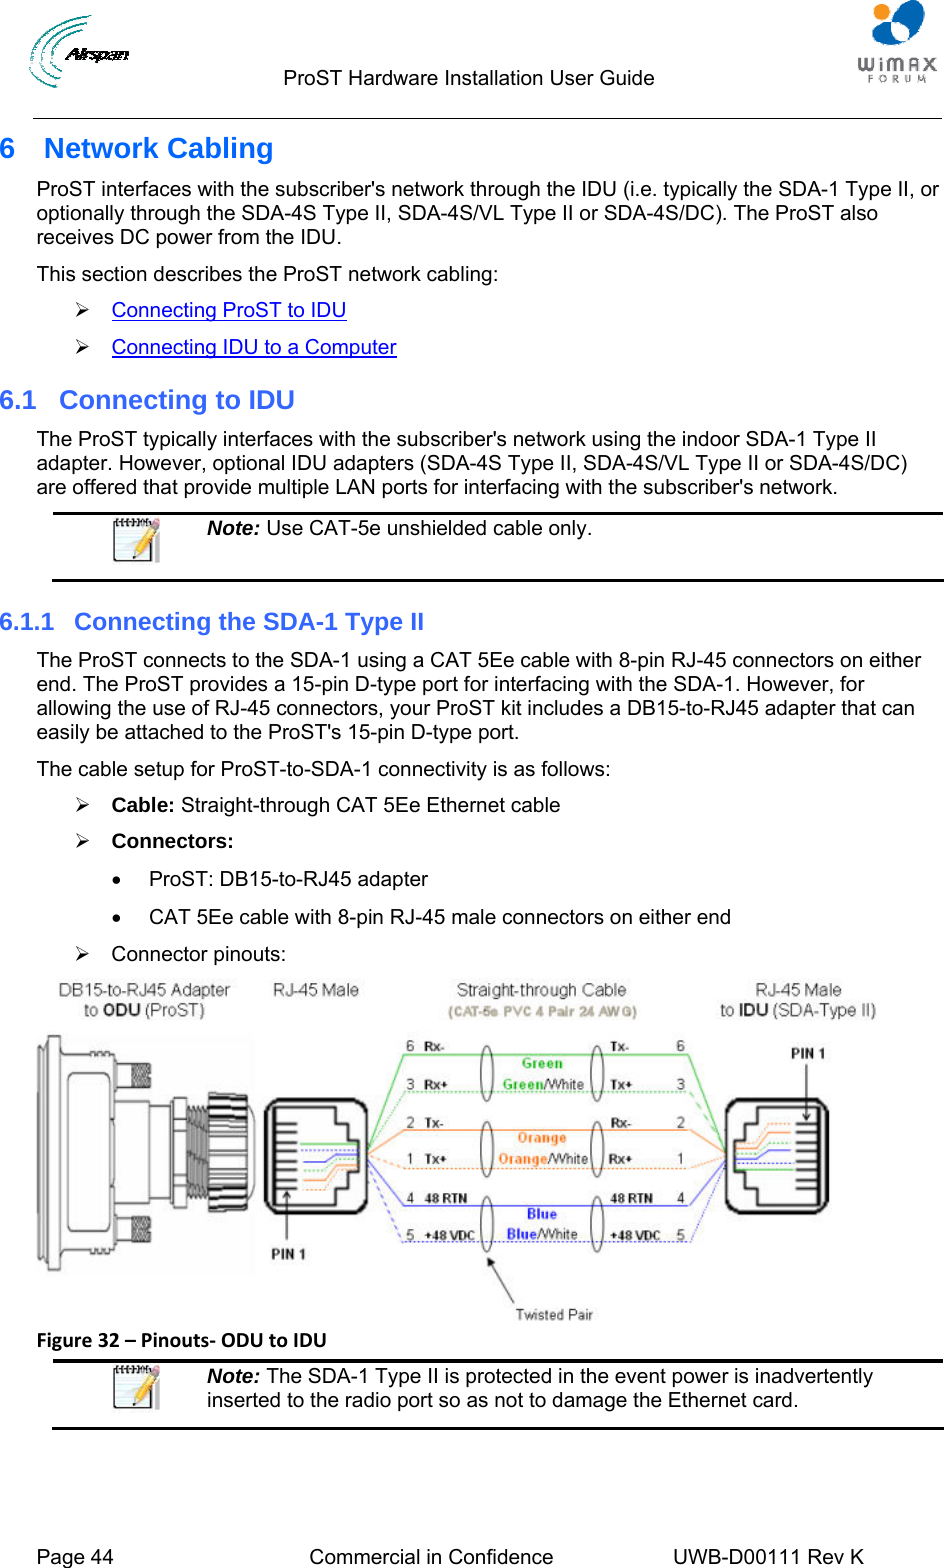                                  ProST Hardware Installation User Guide  Page 44  Commercial in Confidence  UWB-D00111 Rev K   6  Network Cabling ProST interfaces with the subscriber&apos;s network through the IDU (i.e. typically the SDA-1 Type II, or optionally through the SDA-4S Type II, SDA-4S/VL Type II or SDA-4S/DC). The ProST also receives DC power from the IDU.  This section describes the ProST network cabling: ¾ 2Connecting ProST to IDU ¾ 2Connecting IDU to a Computer 6.1  Connecting to IDU The ProST typically interfaces with the subscriber&apos;s network using the indoor SDA-1 Type II adapter. However, optional IDU adapters (SDA-4S Type II, SDA-4S/VL Type II or SDA-4S/DC) are offered that provide multiple LAN ports for interfacing with the subscriber&apos;s network.   Note: Use CAT-5e unshielded cable only. 6.1.1  Connecting the SDA-1 Type II The ProST connects to the SDA-1 using a CAT 5Ee cable with 8-pin RJ-45 connectors on either end. The ProST provides a 15-pin D-type port for interfacing with the SDA-1. However, for allowing the use of RJ-45 connectors, your ProST kit includes a DB15-to-RJ45 adapter that can easily be attached to the ProST&apos;s 15-pin D-type port. The cable setup for ProST-to-SDA-1 connectivity is as follows: ¾ Cable: Straight-through CAT 5Ee Ethernet cable ¾ Connectors:  •  ProST: DB15-to-RJ45 adapter •  CAT 5Ee cable with 8-pin RJ-45 male connectors on either end ¾ Connector pinouts:  Figure32–Pinouts‐ODUtoIDU Note: The SDA-1 Type II is protected in the event power is inadvertently inserted to the radio port so as not to damage the Ethernet card.  